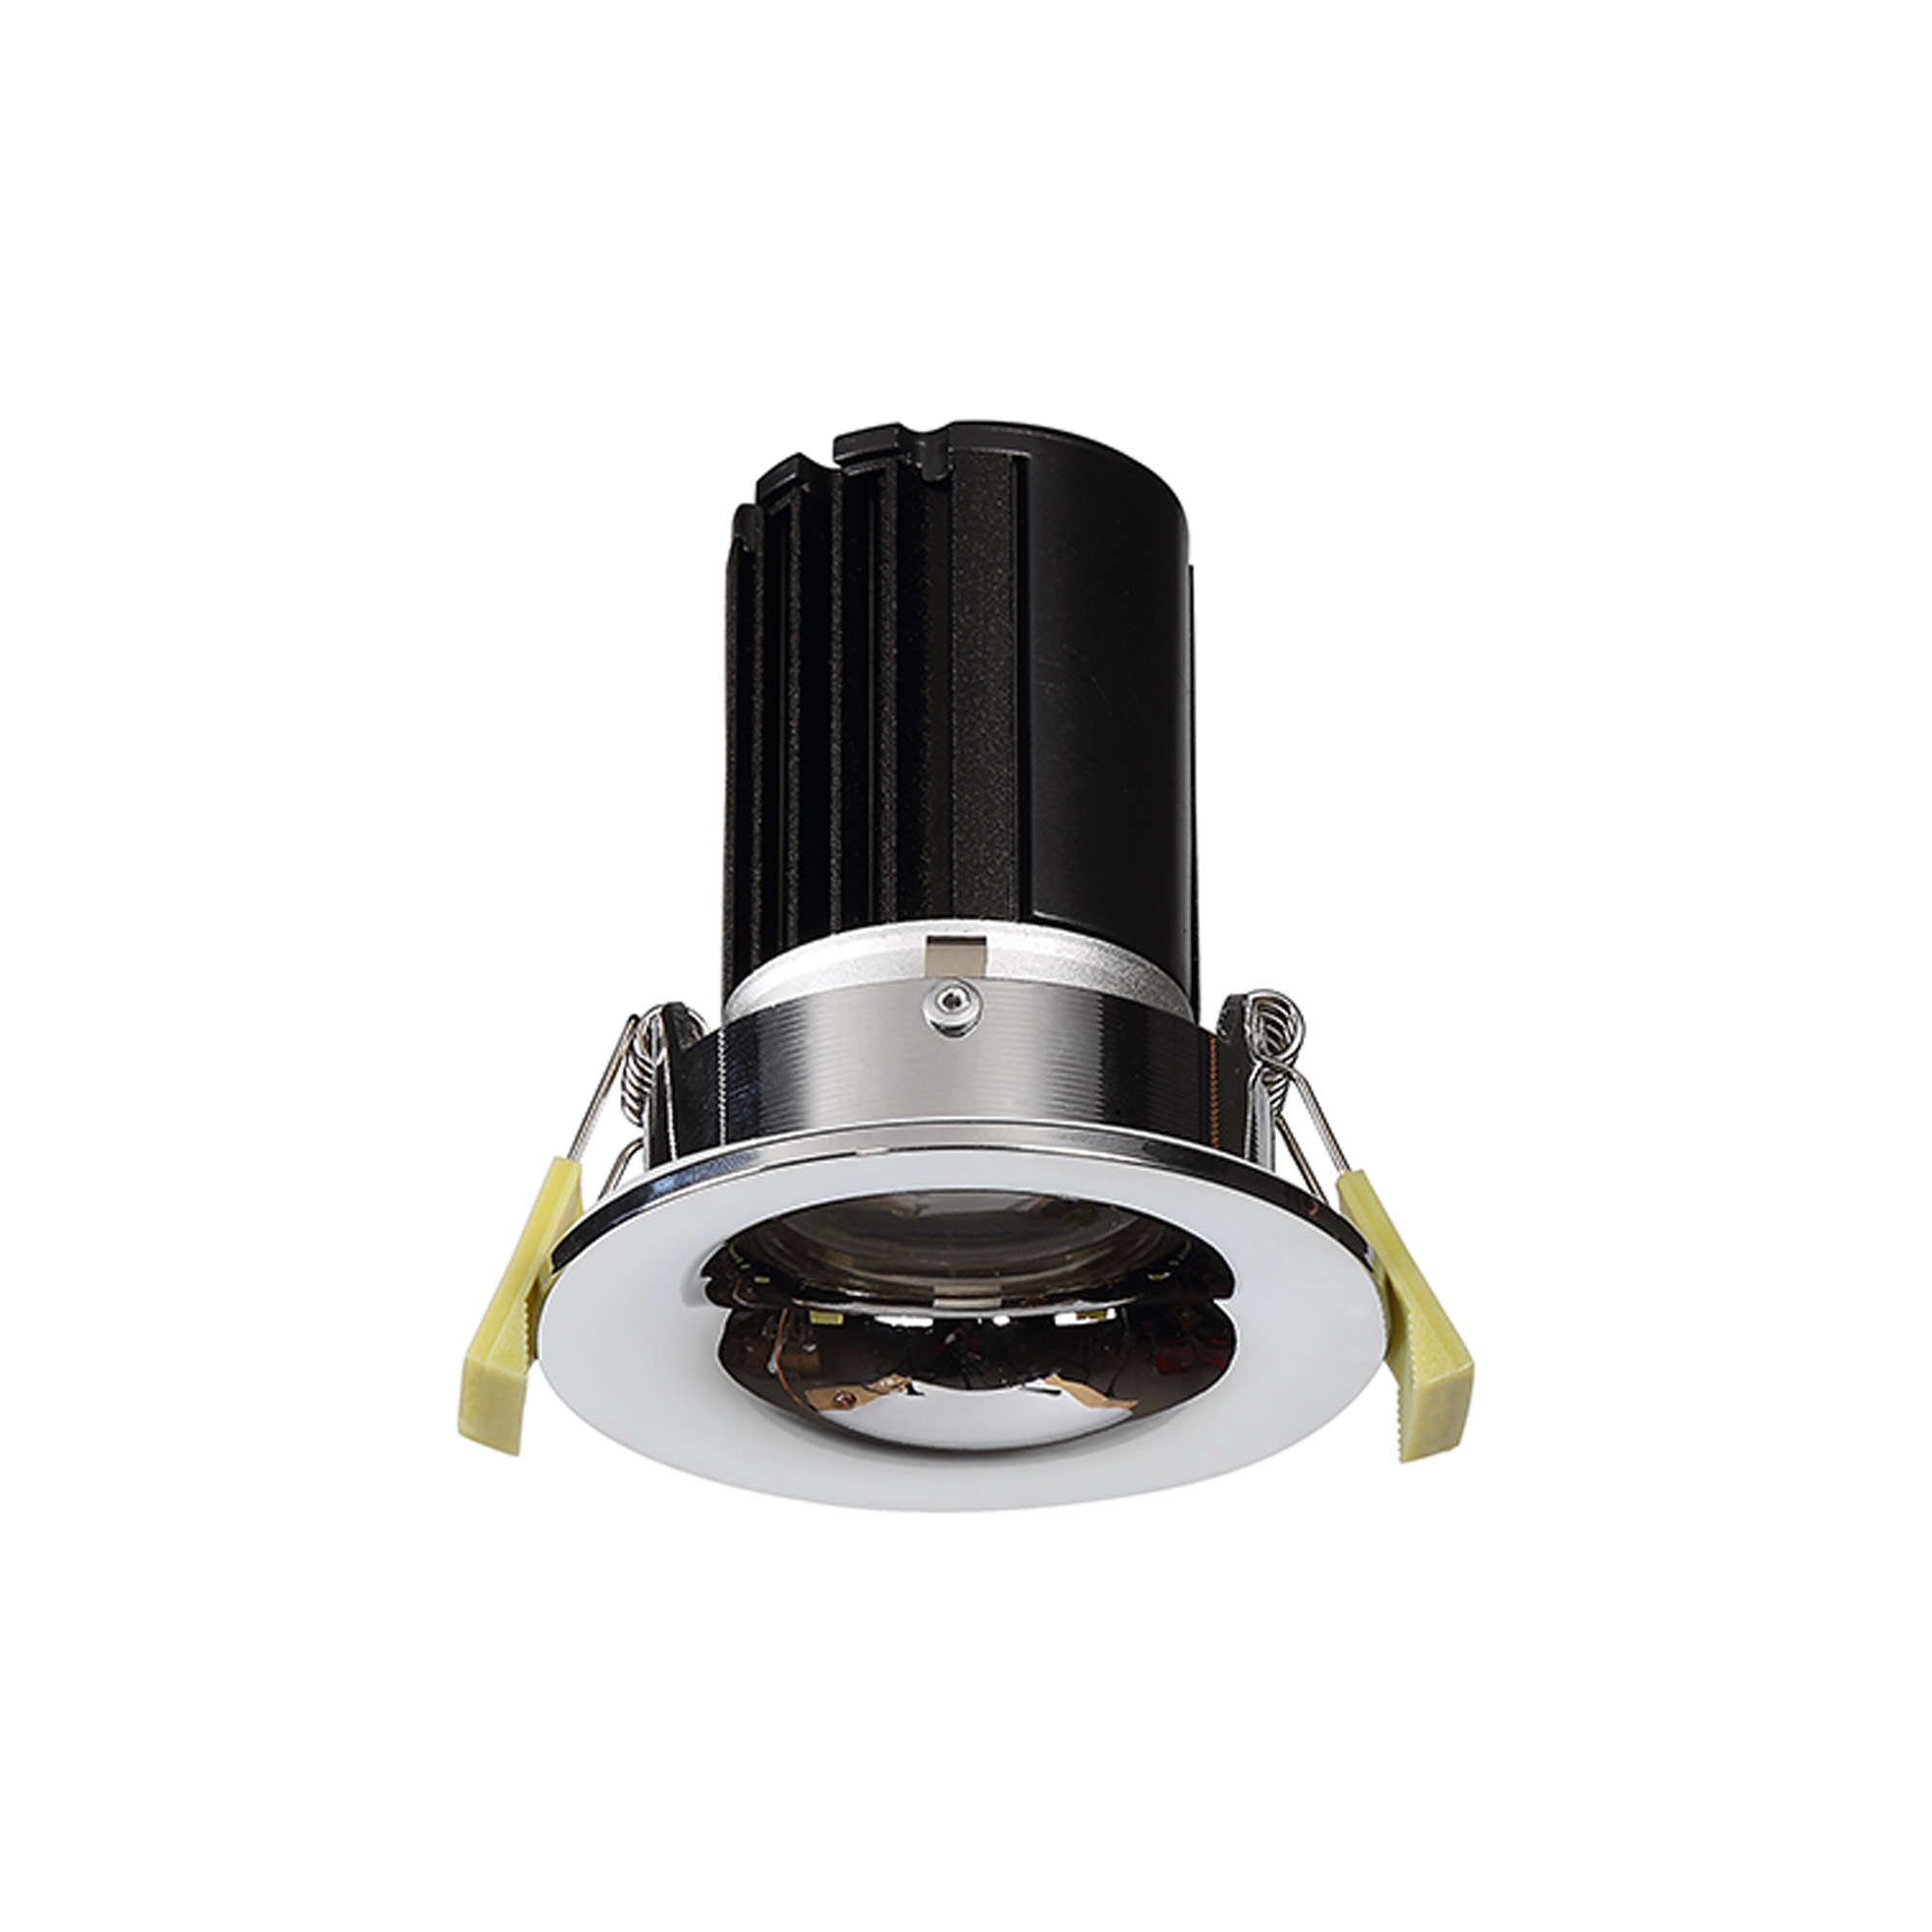 DM201468  Bruve 9 Tridonic powered 9W 2700K 700lm 24° LED Engine,250mA , CRI>90 LED Engine Polished Chrome Fixed Round Recessed Downlight, Inner Glass cover, IP65